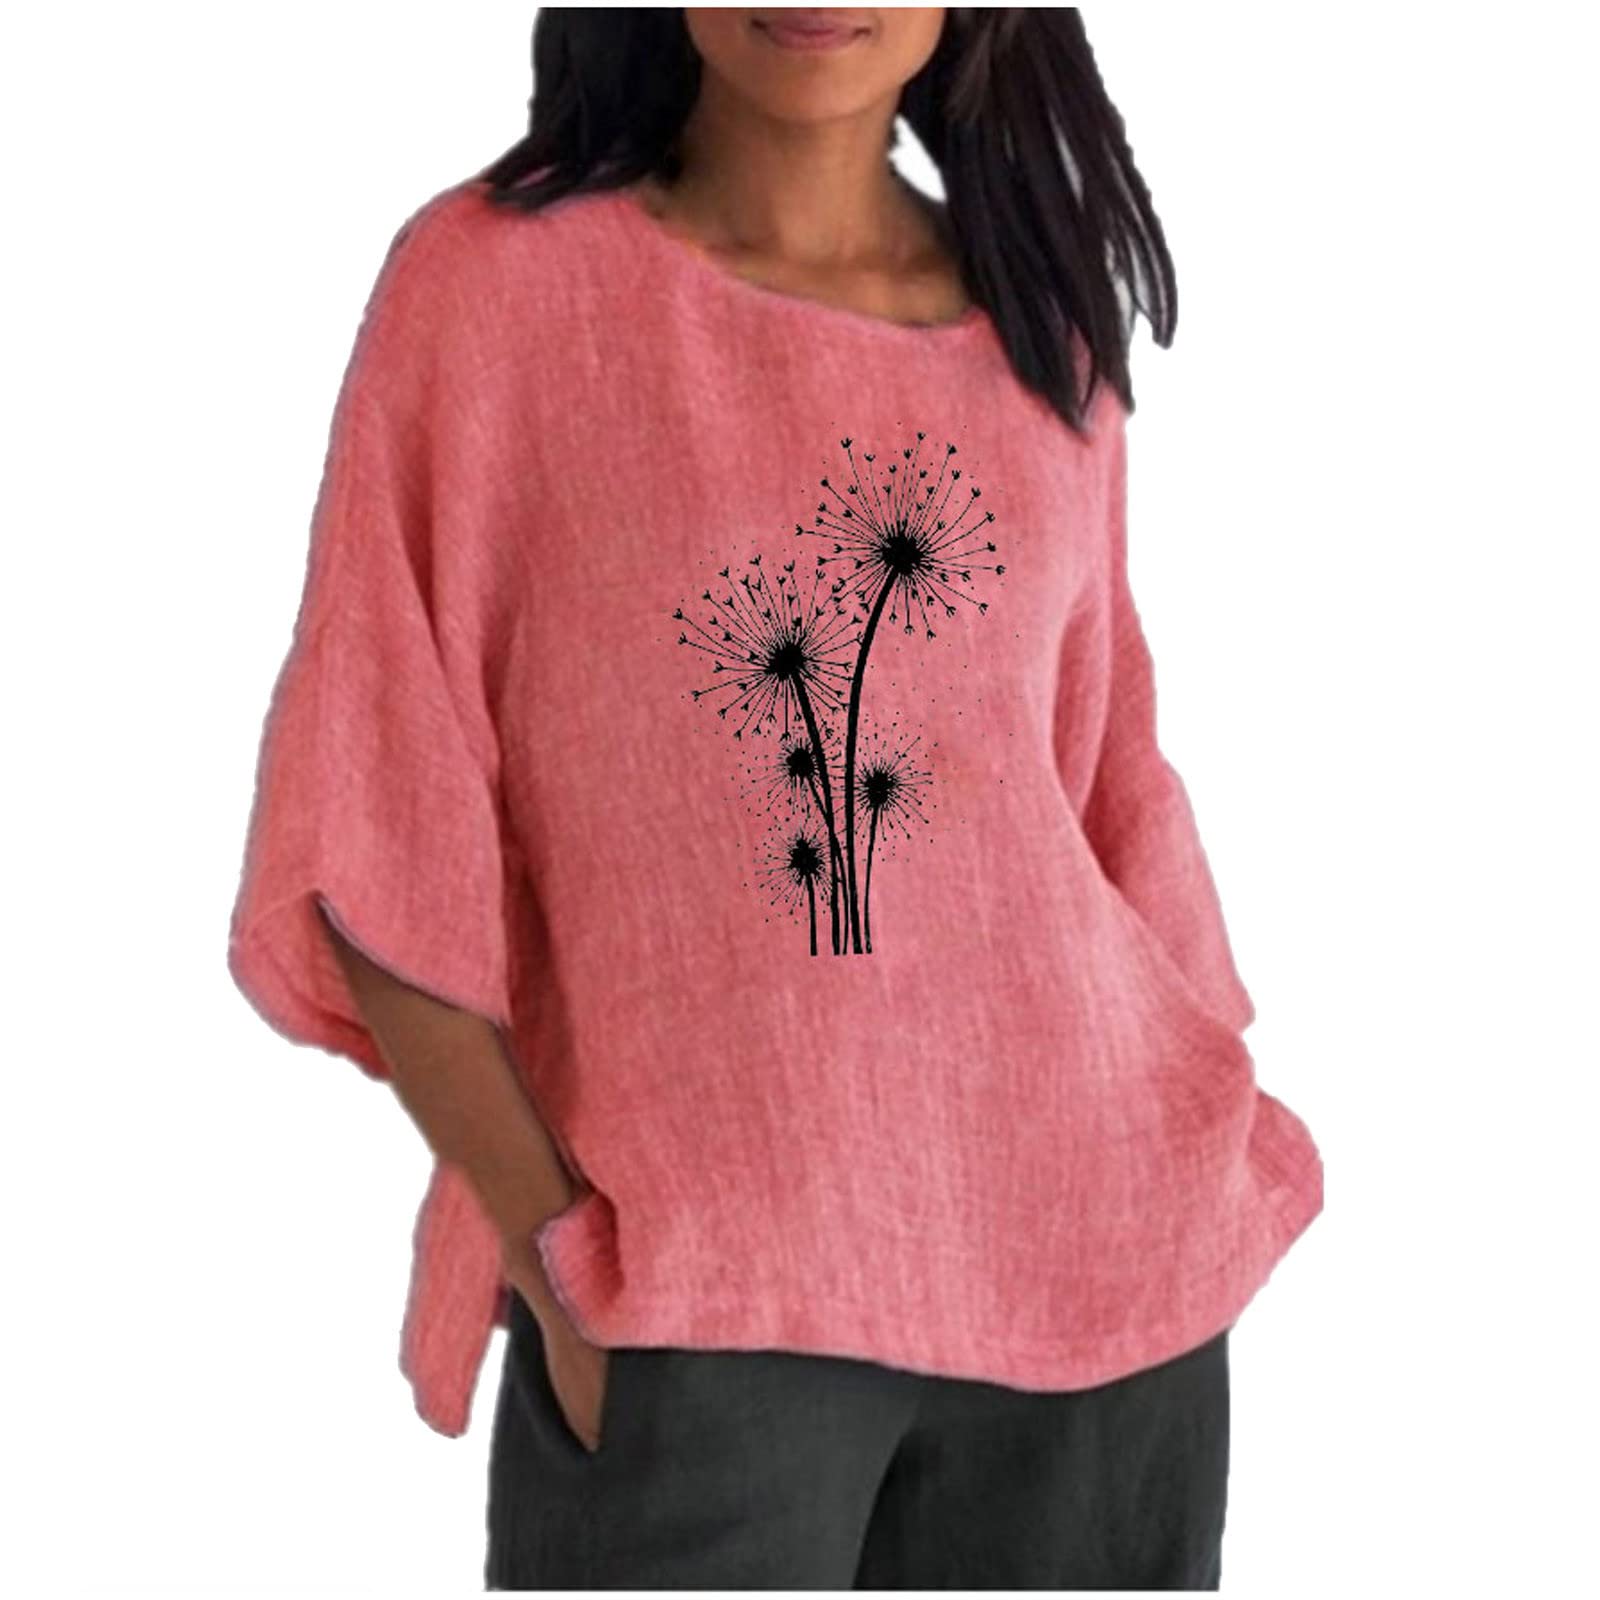 Plus Size Printed Long Tops For Women Full Sleeves T-shirts - Blush Pink